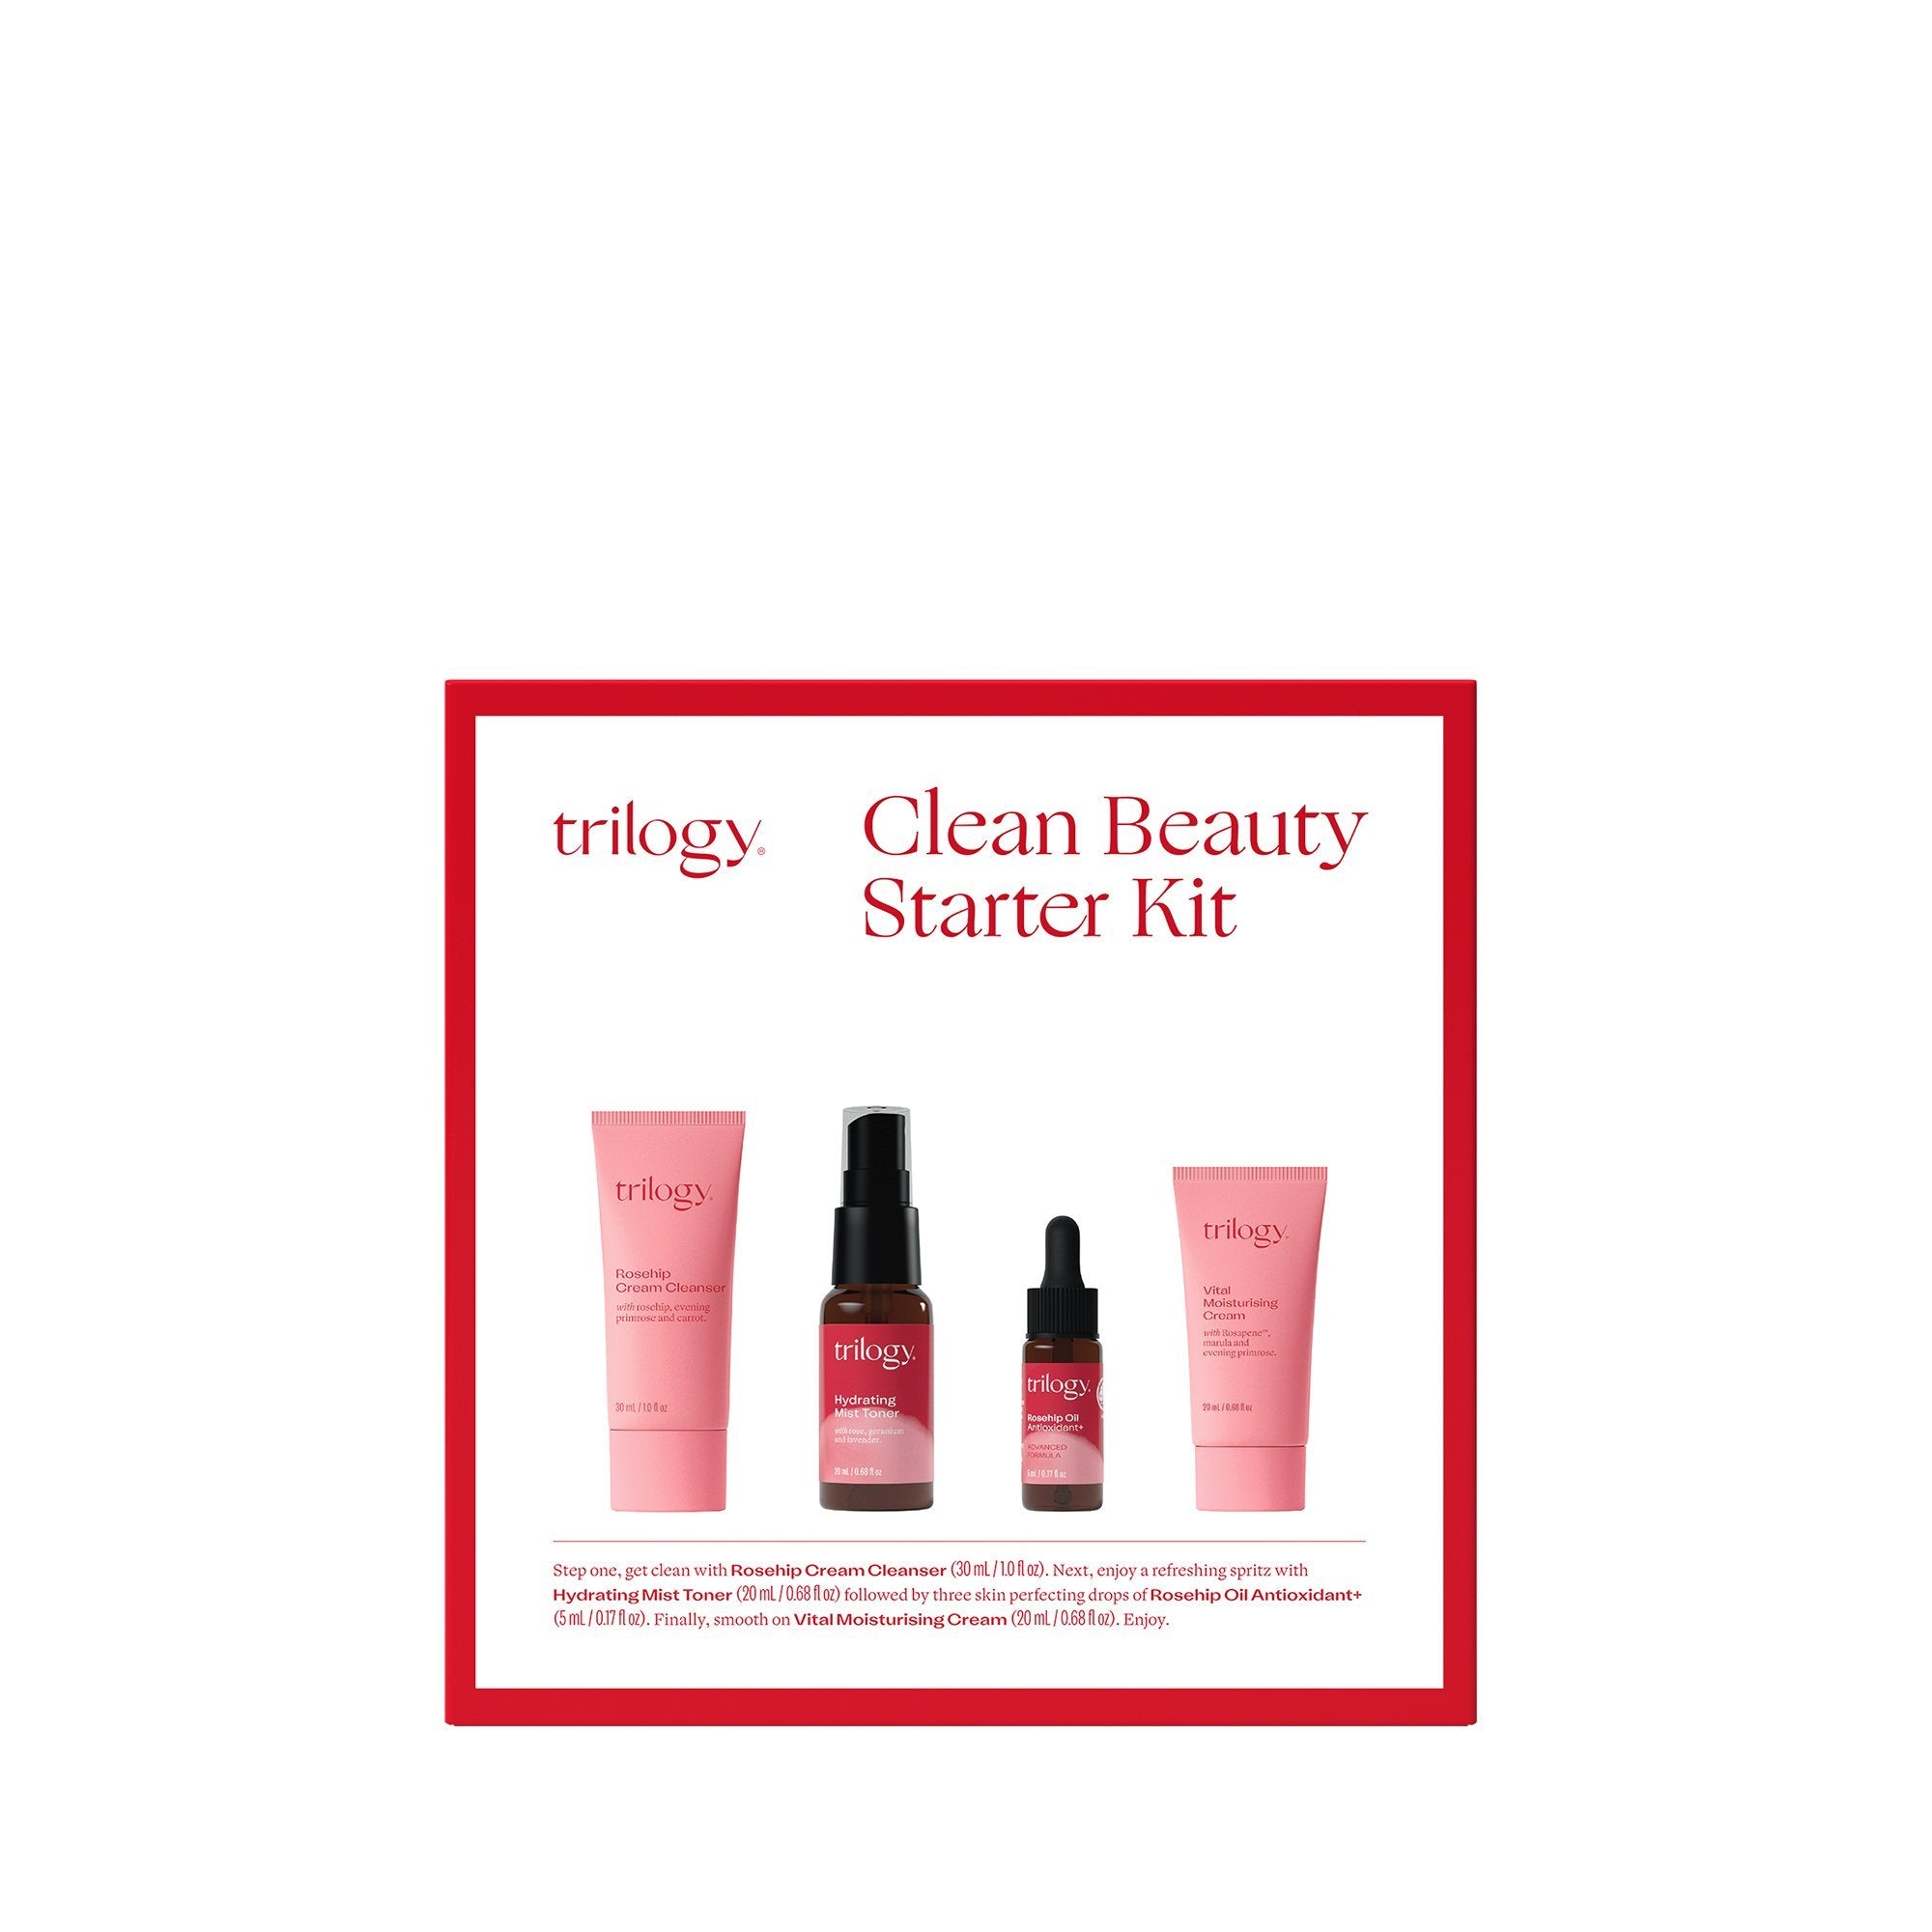 GIFT Limited Edition Clean Beauty Starter Kit